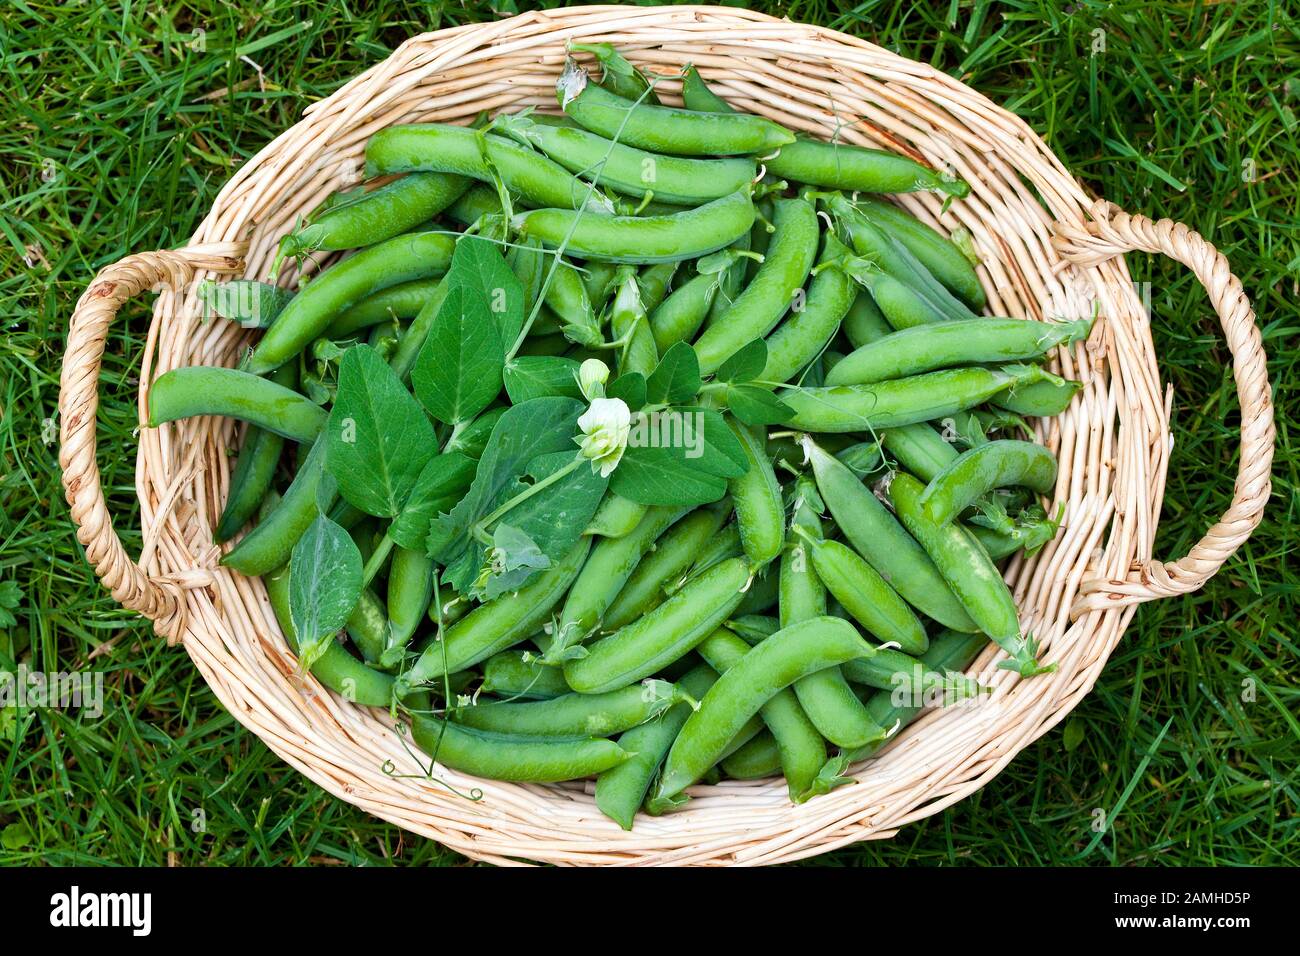 Freshly picked pods of peas in a wicker basket. Stock Photo